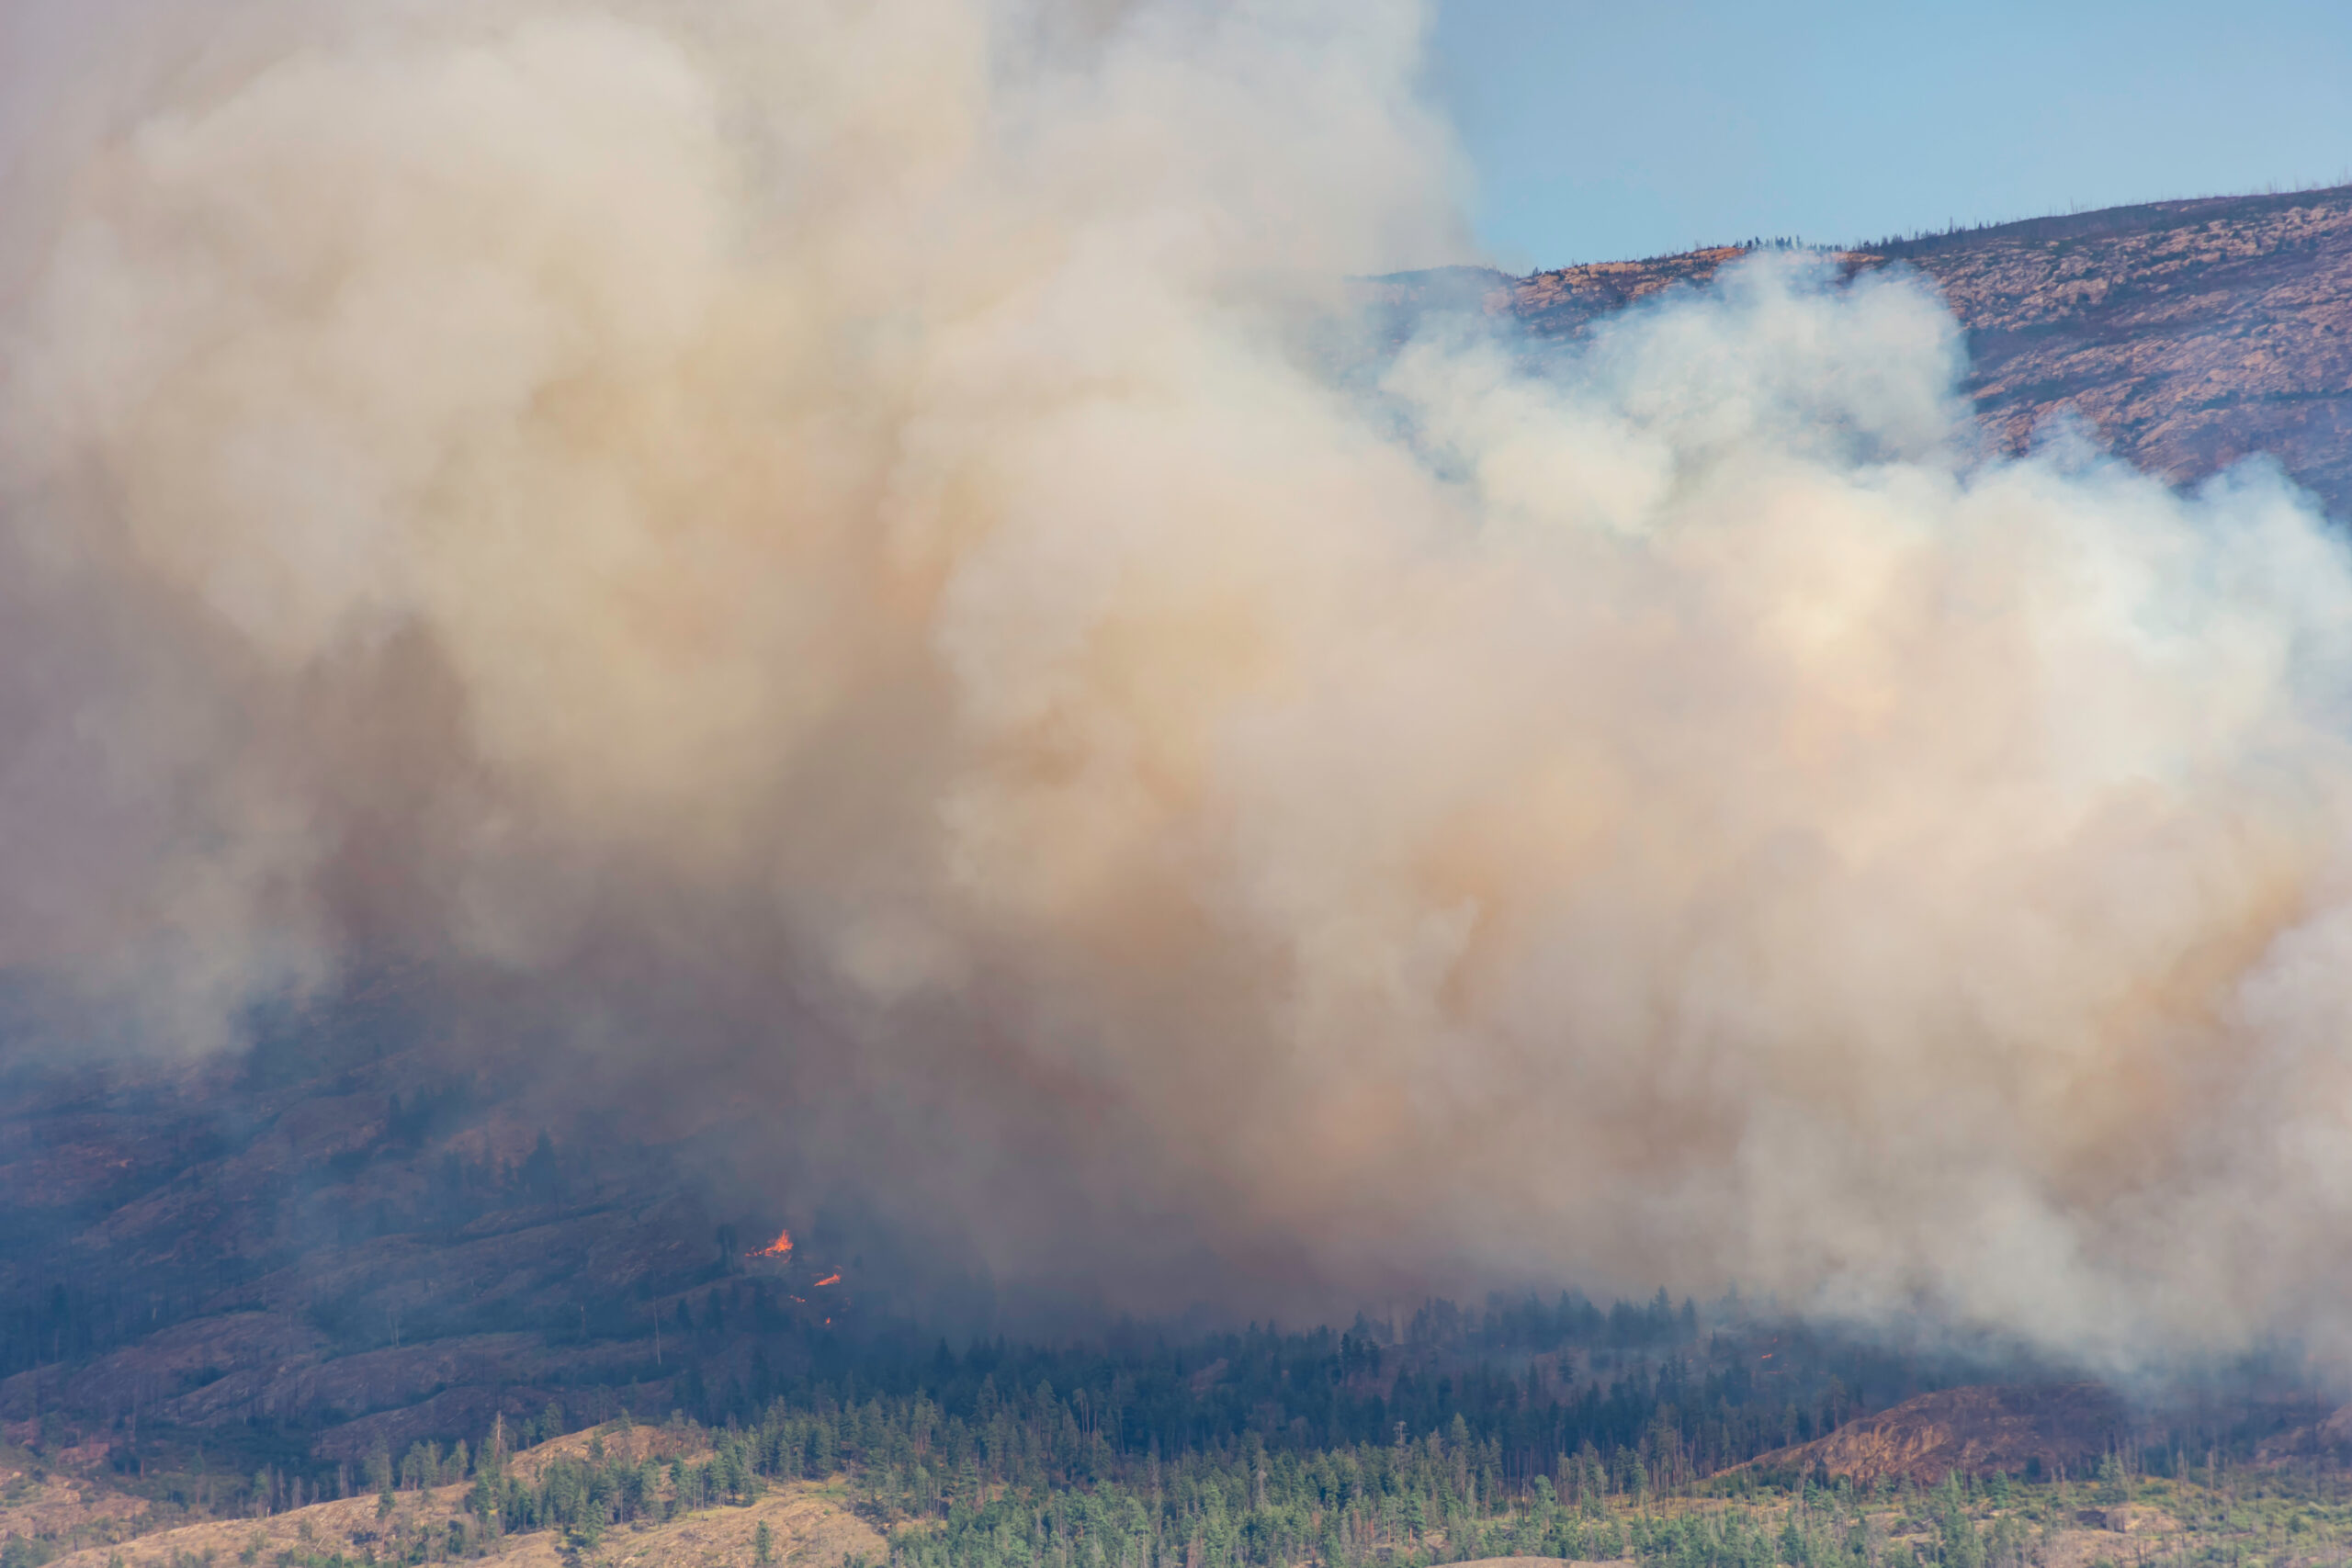 Wildfire Season, Wildfire Preparedness, Facilities Management Wildfire Safety, Protecting Properties from Wildfires, Wildfire Season Preparation, Wildfire Safety Measures for Facilities